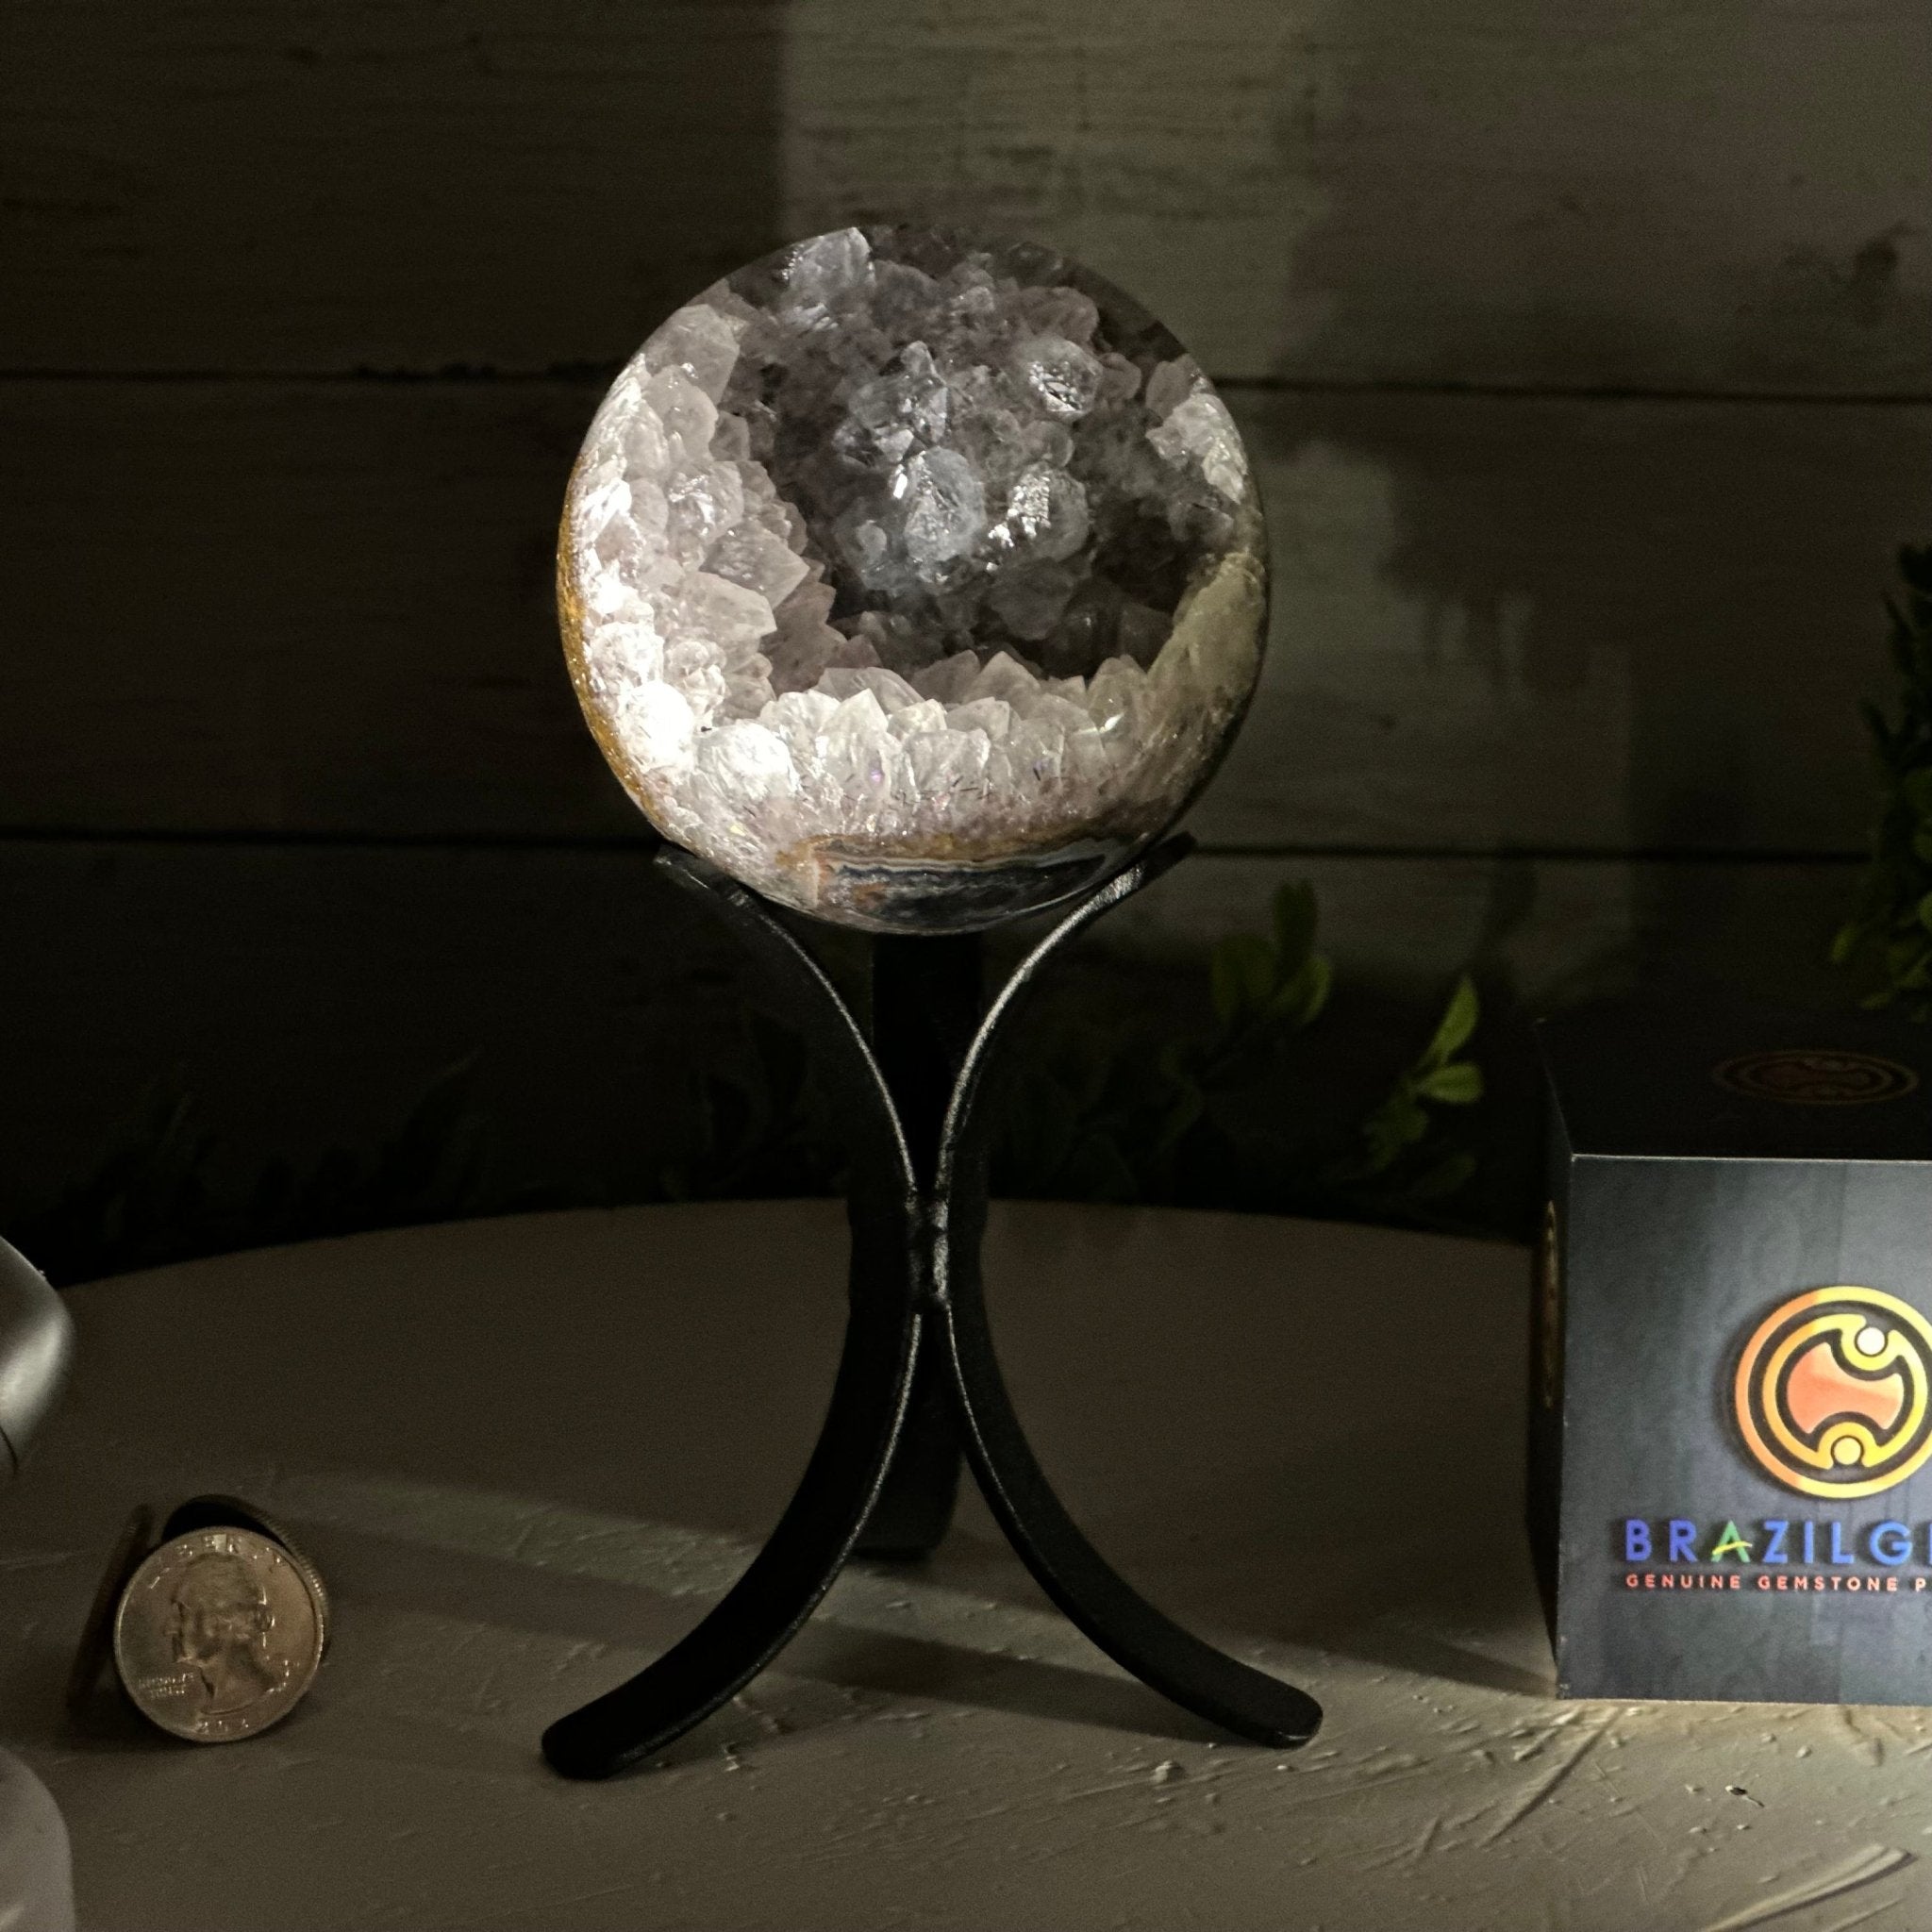 Druzy White Amethyst Sphere on a Metal Stand, 1.1 lbs & 6.7" Tall #5630-0037 - Brazil GemsBrazil GemsDruzy White Amethyst Sphere on a Metal Stand, 1.1 lbs & 6.7" Tall #5630-0037Spheres5630-0037